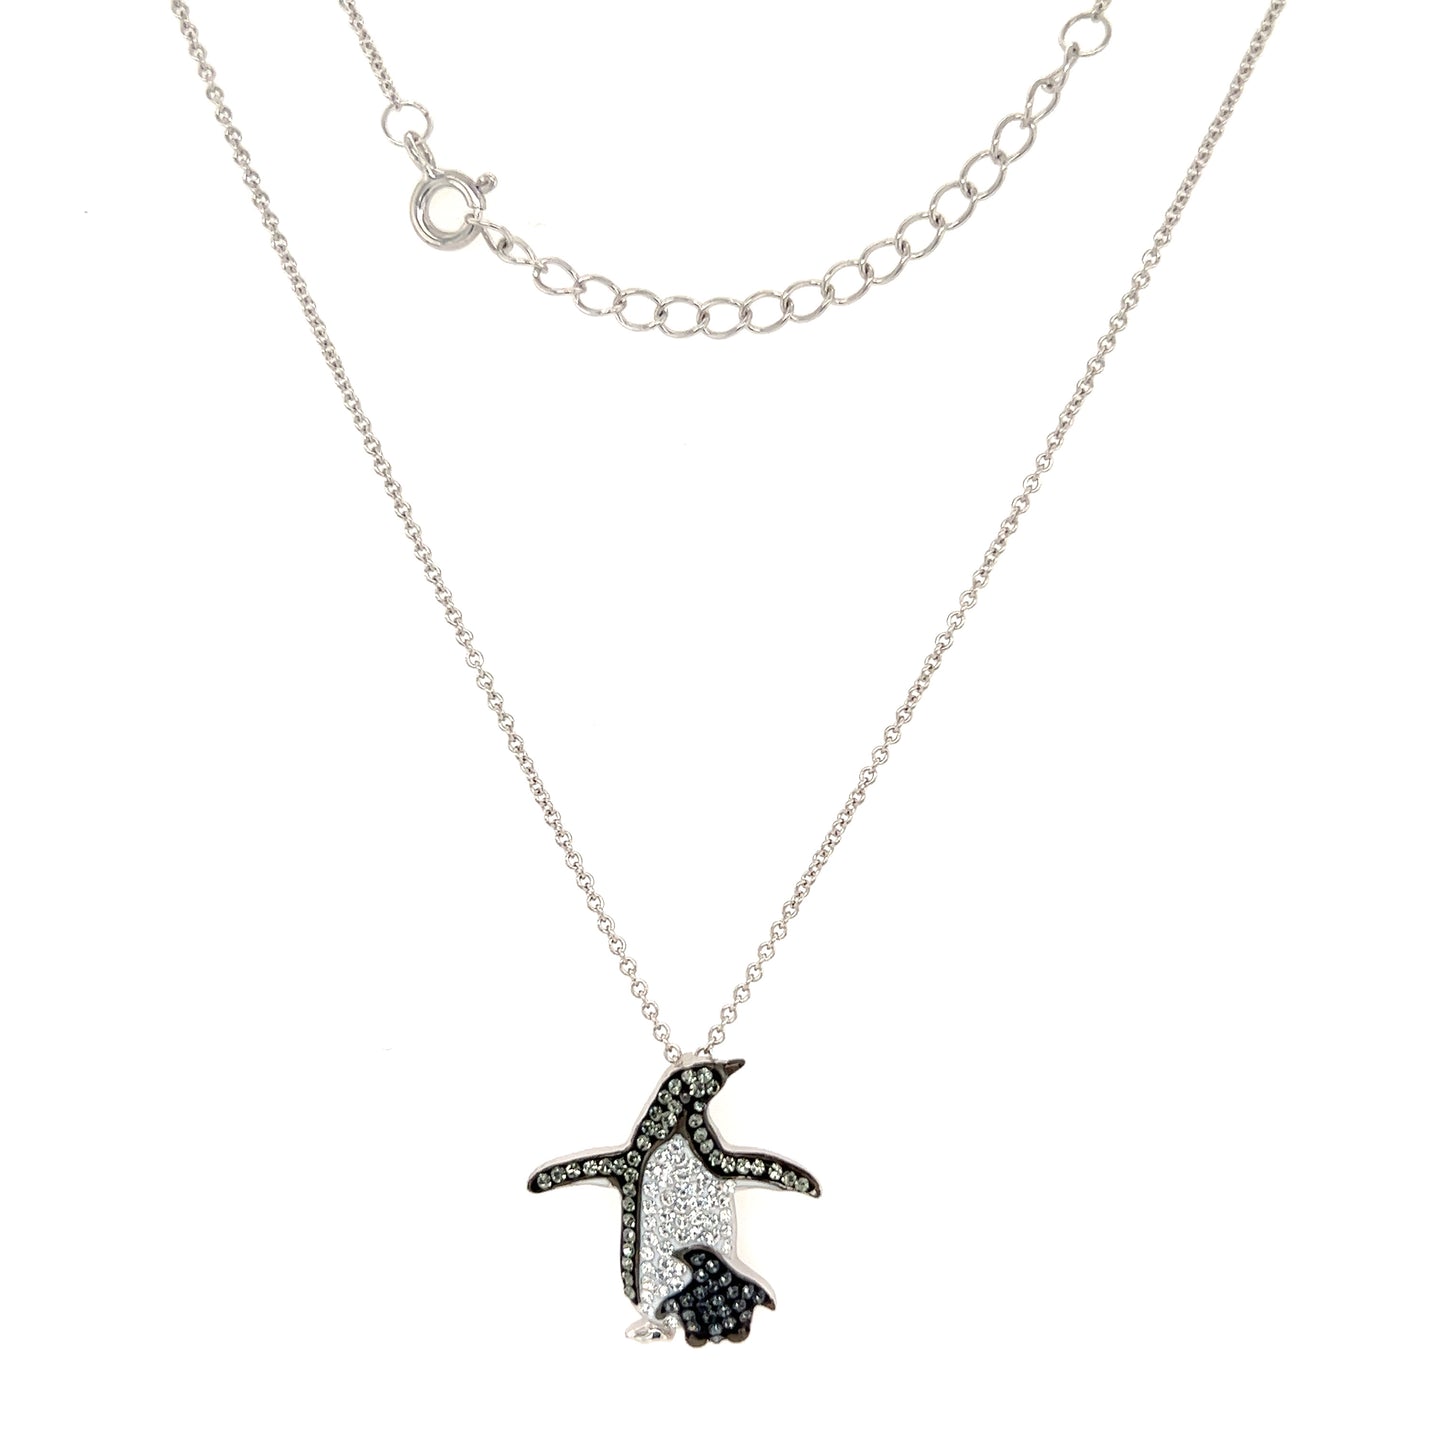 Penguin and Baby Necklace with Crystals in Sterling Silver Full Necklace View